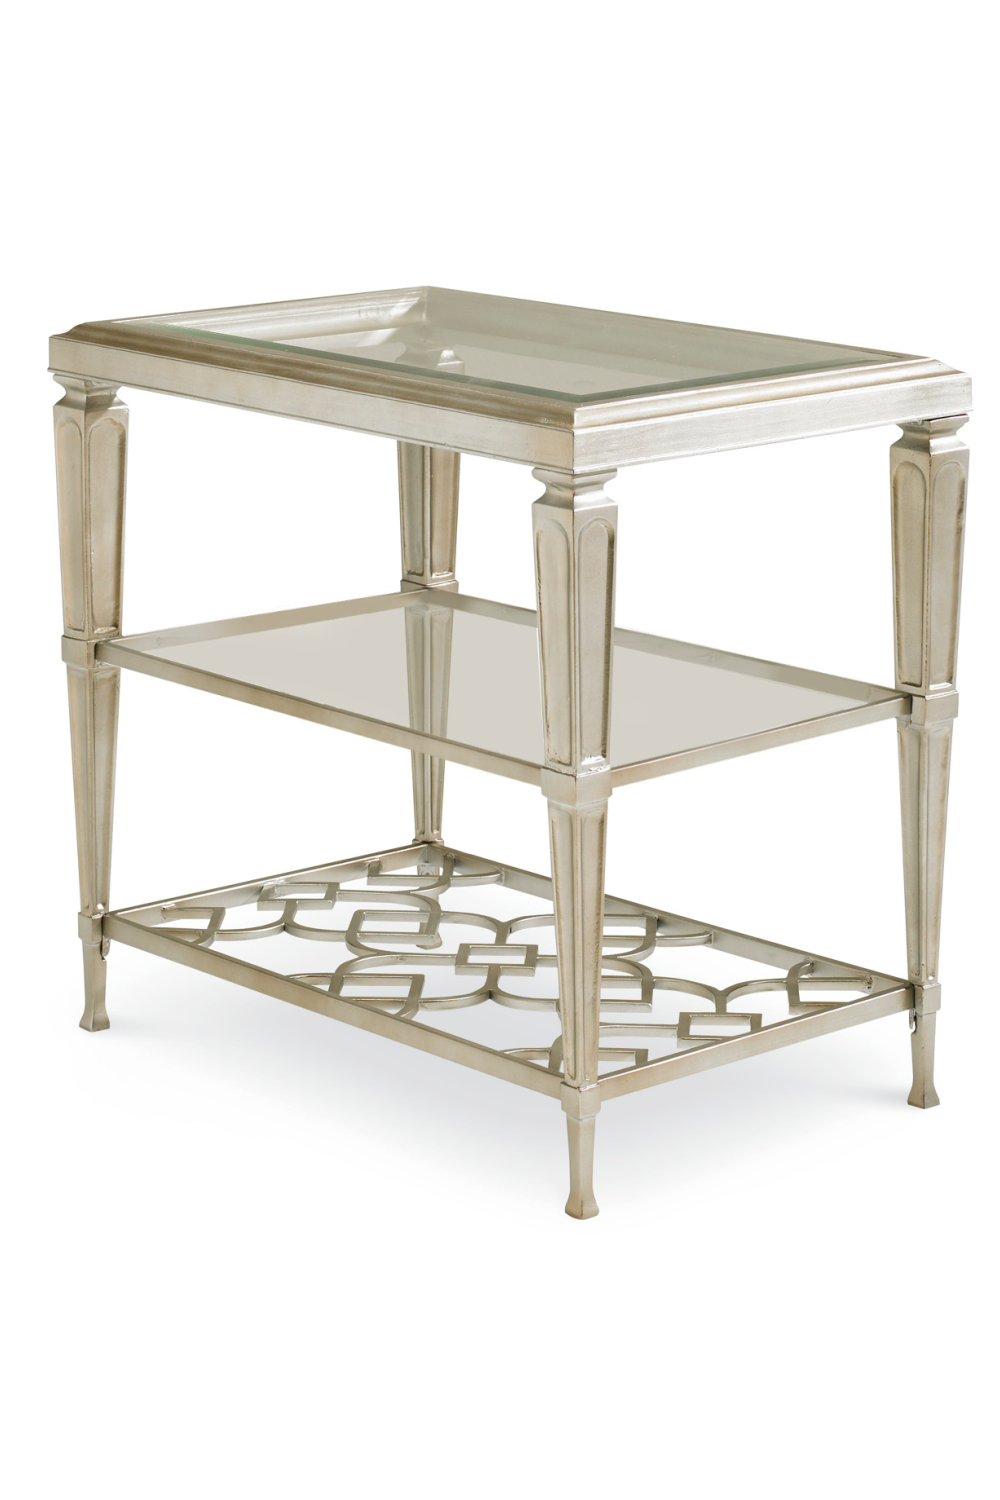 Metallic Side Table With Shelves | Caracole Social Connections  | Oroa.com